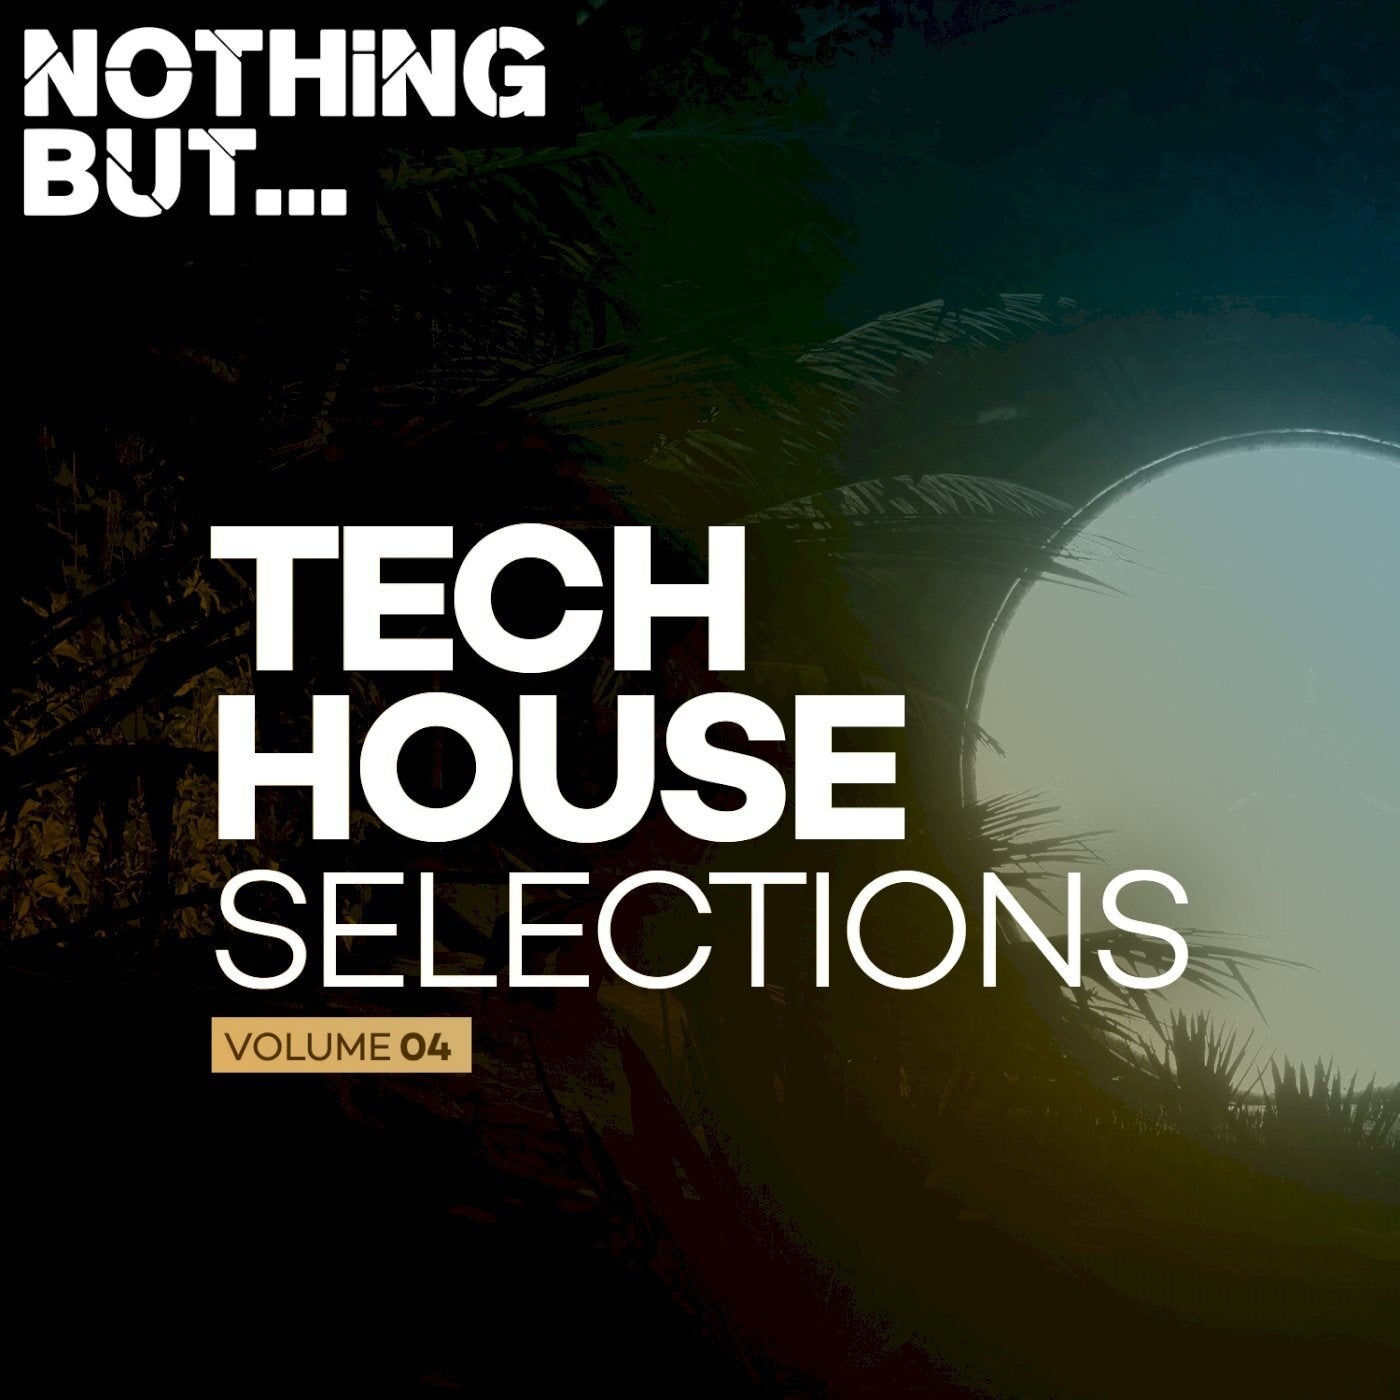 VA - Nothing But... Tech House Selections, Vol. 04 [NBTHS04]